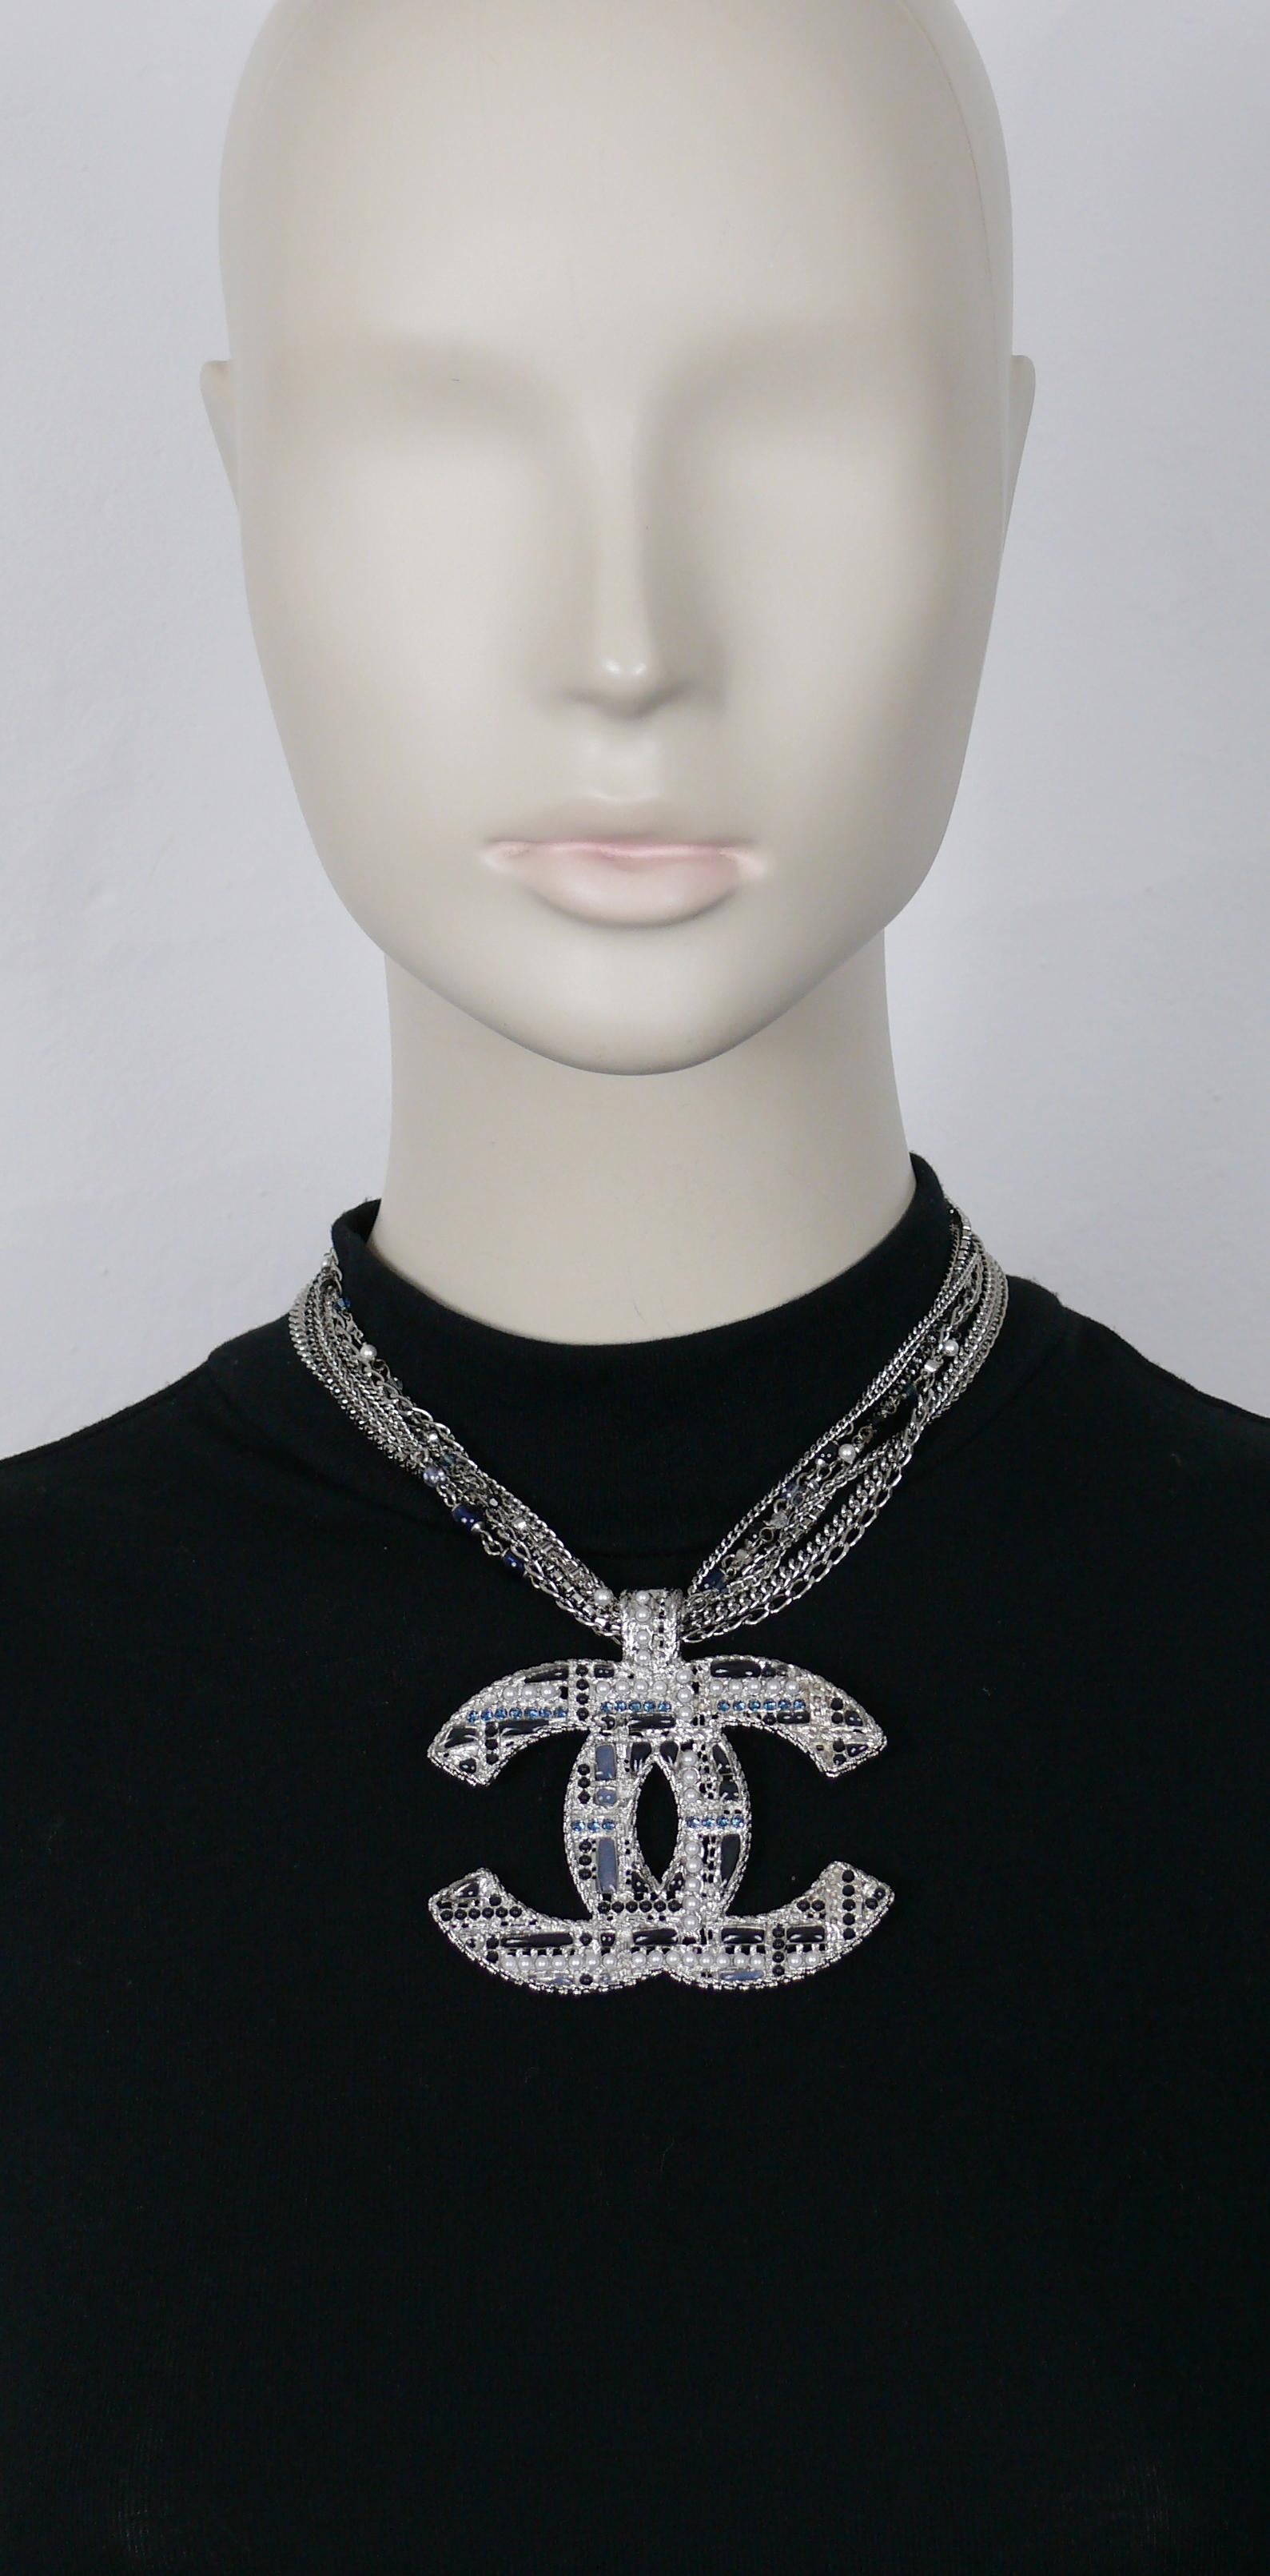 CHANEL silver toned multi-strand necklace featuring a massive CC pendant embellished with blue/grey poured resin, blue crystals, faux pearls and black beads.

Multi-strand intertwined chains embellished with black crystals, black/blue beads and faux